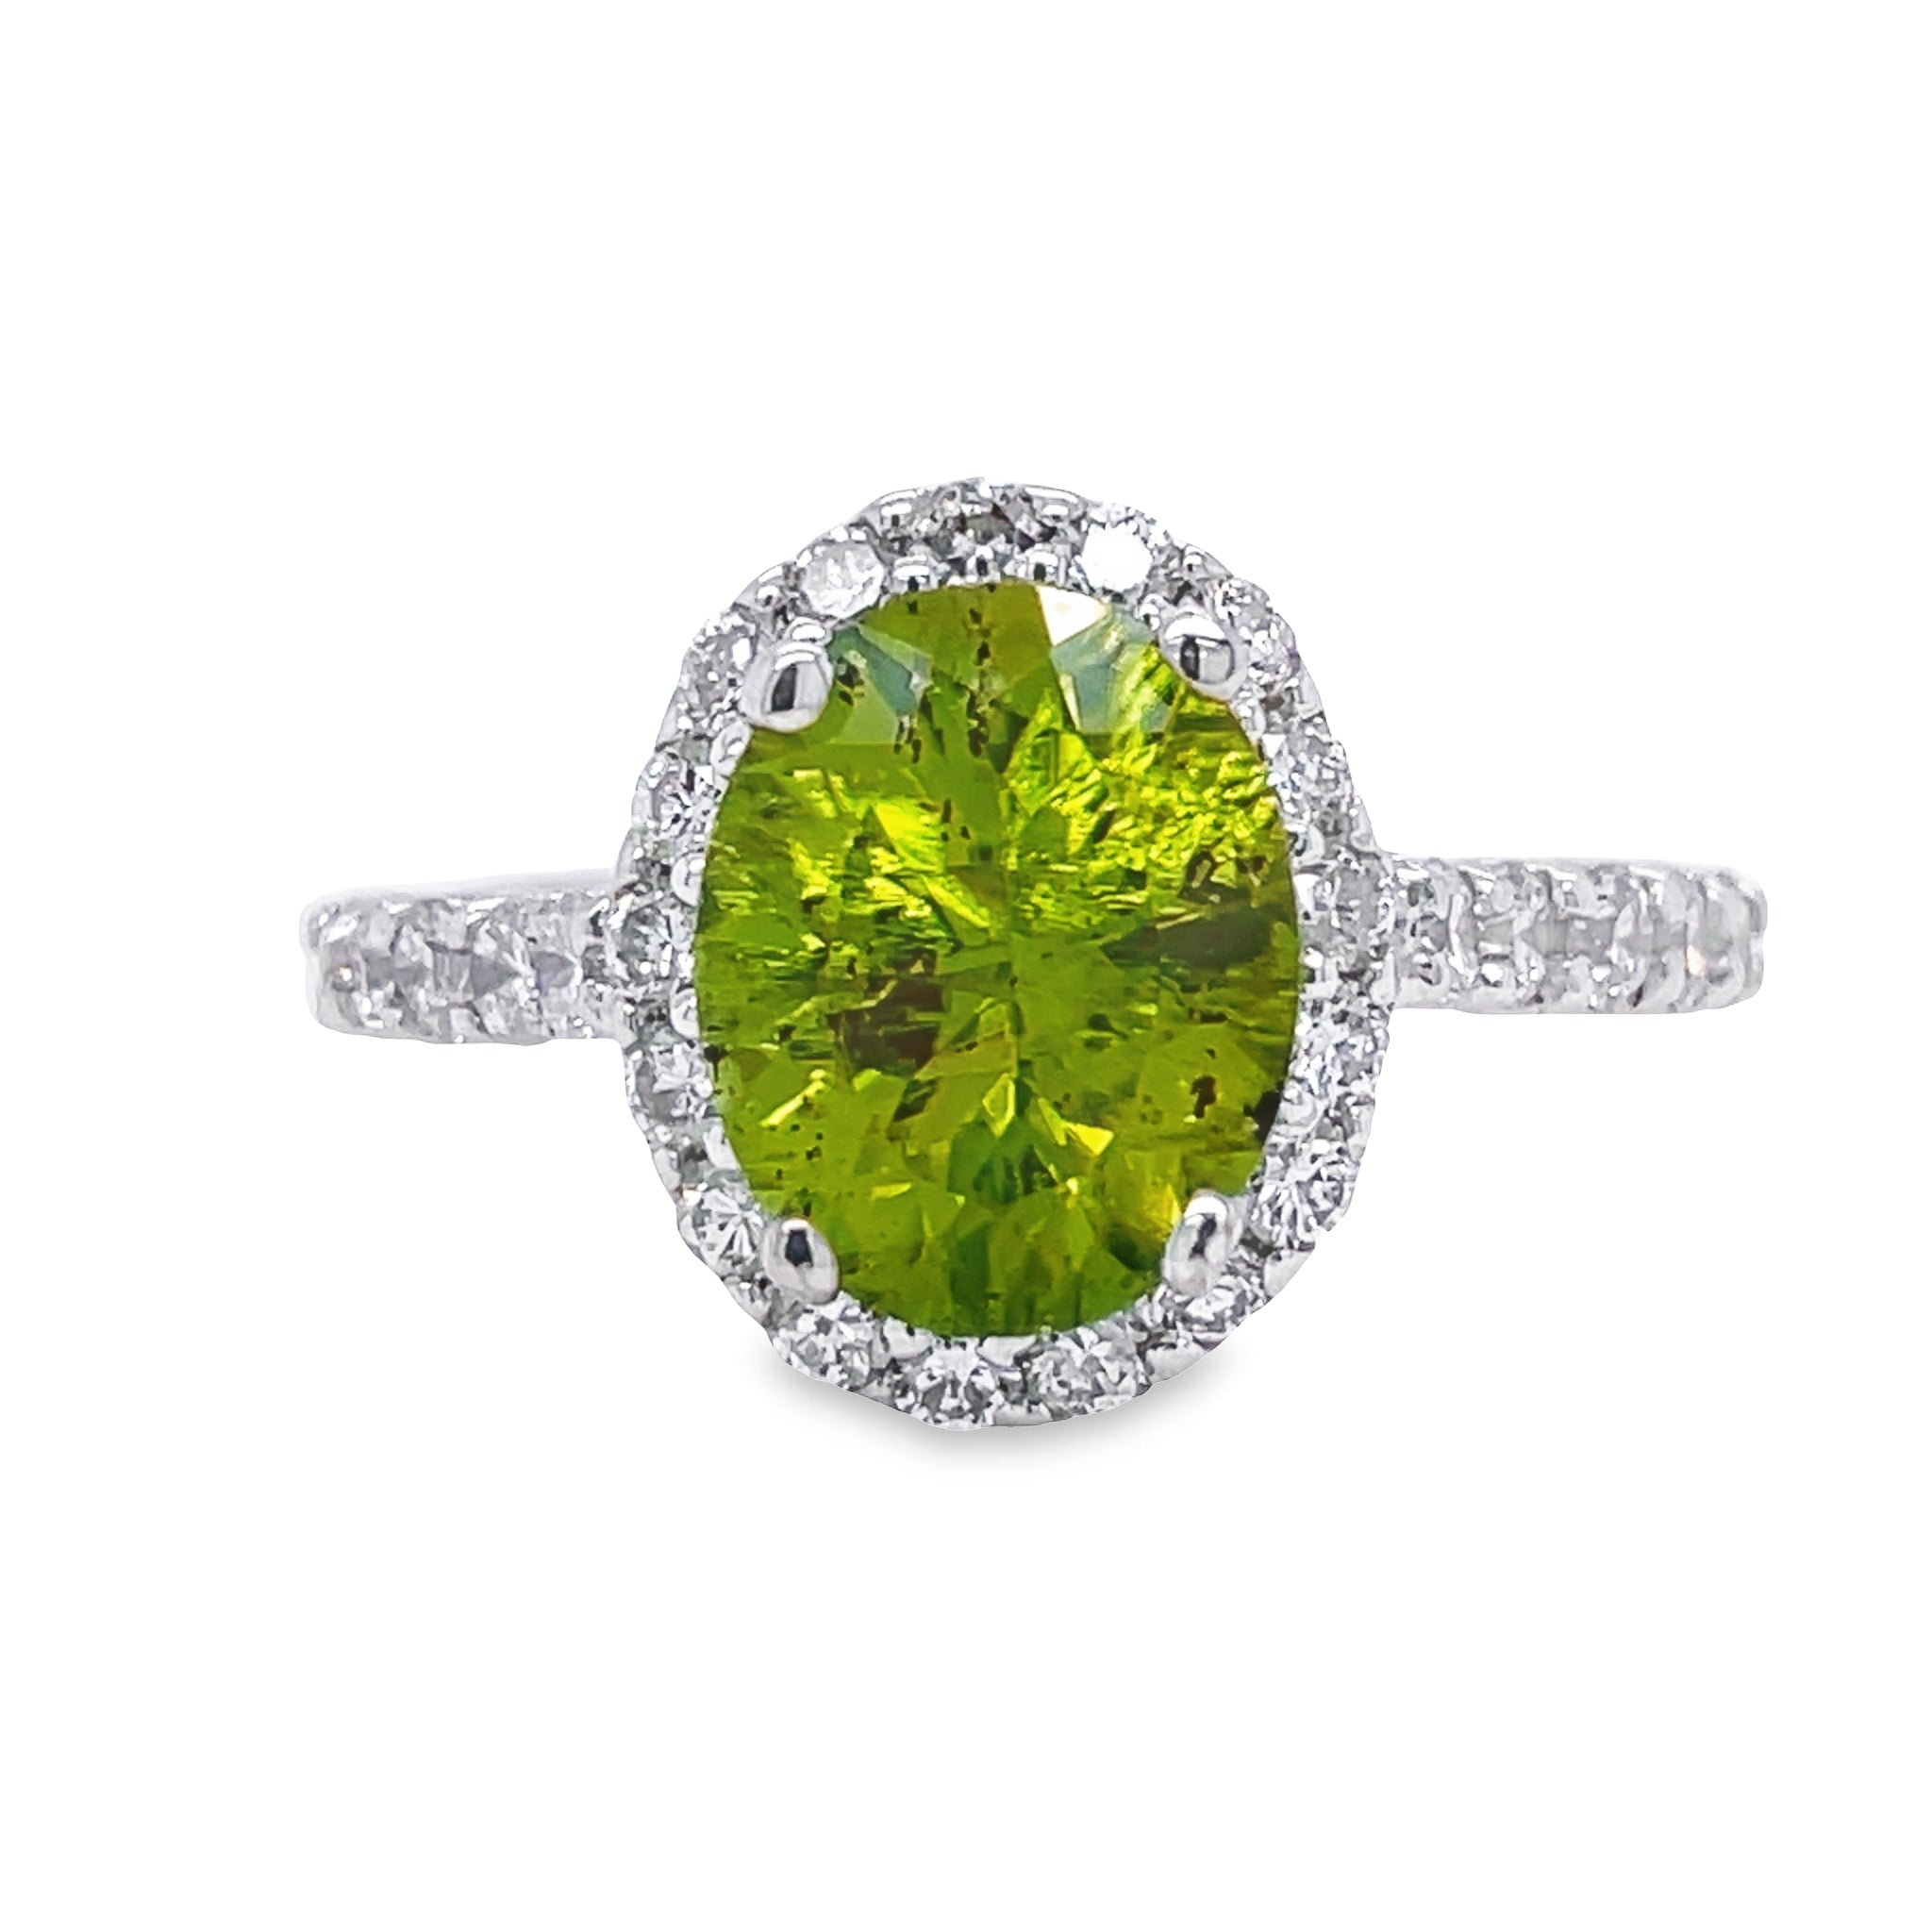 This exquisite Oval Peridot & Diamond Ring is crafted with a brilliant oval peridot paired with dazzling round diamonds that total 1.01 carats. Set in 14k white gold, lovely and precious, this beauty is sure to give you a timeless sparkle. Get ready to feel the love with this stunning ring!